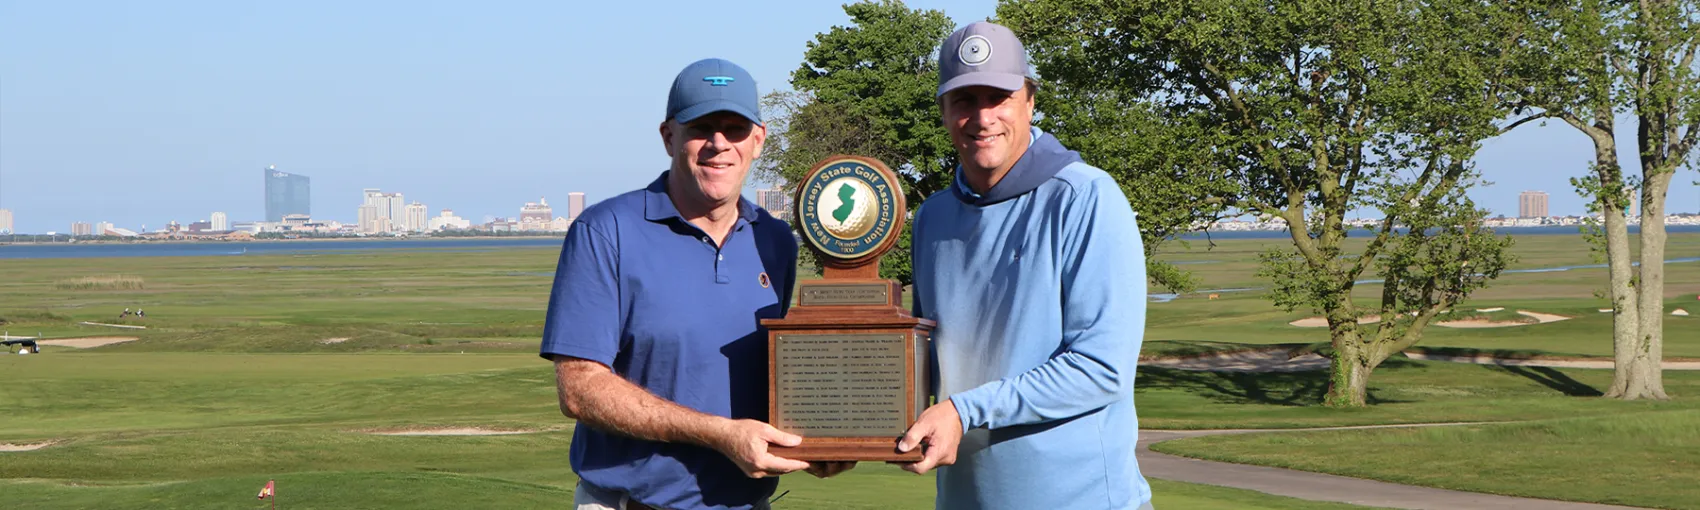 Gotterup and Housen Capture 29th New Jersey Senior Four-Ball Championship